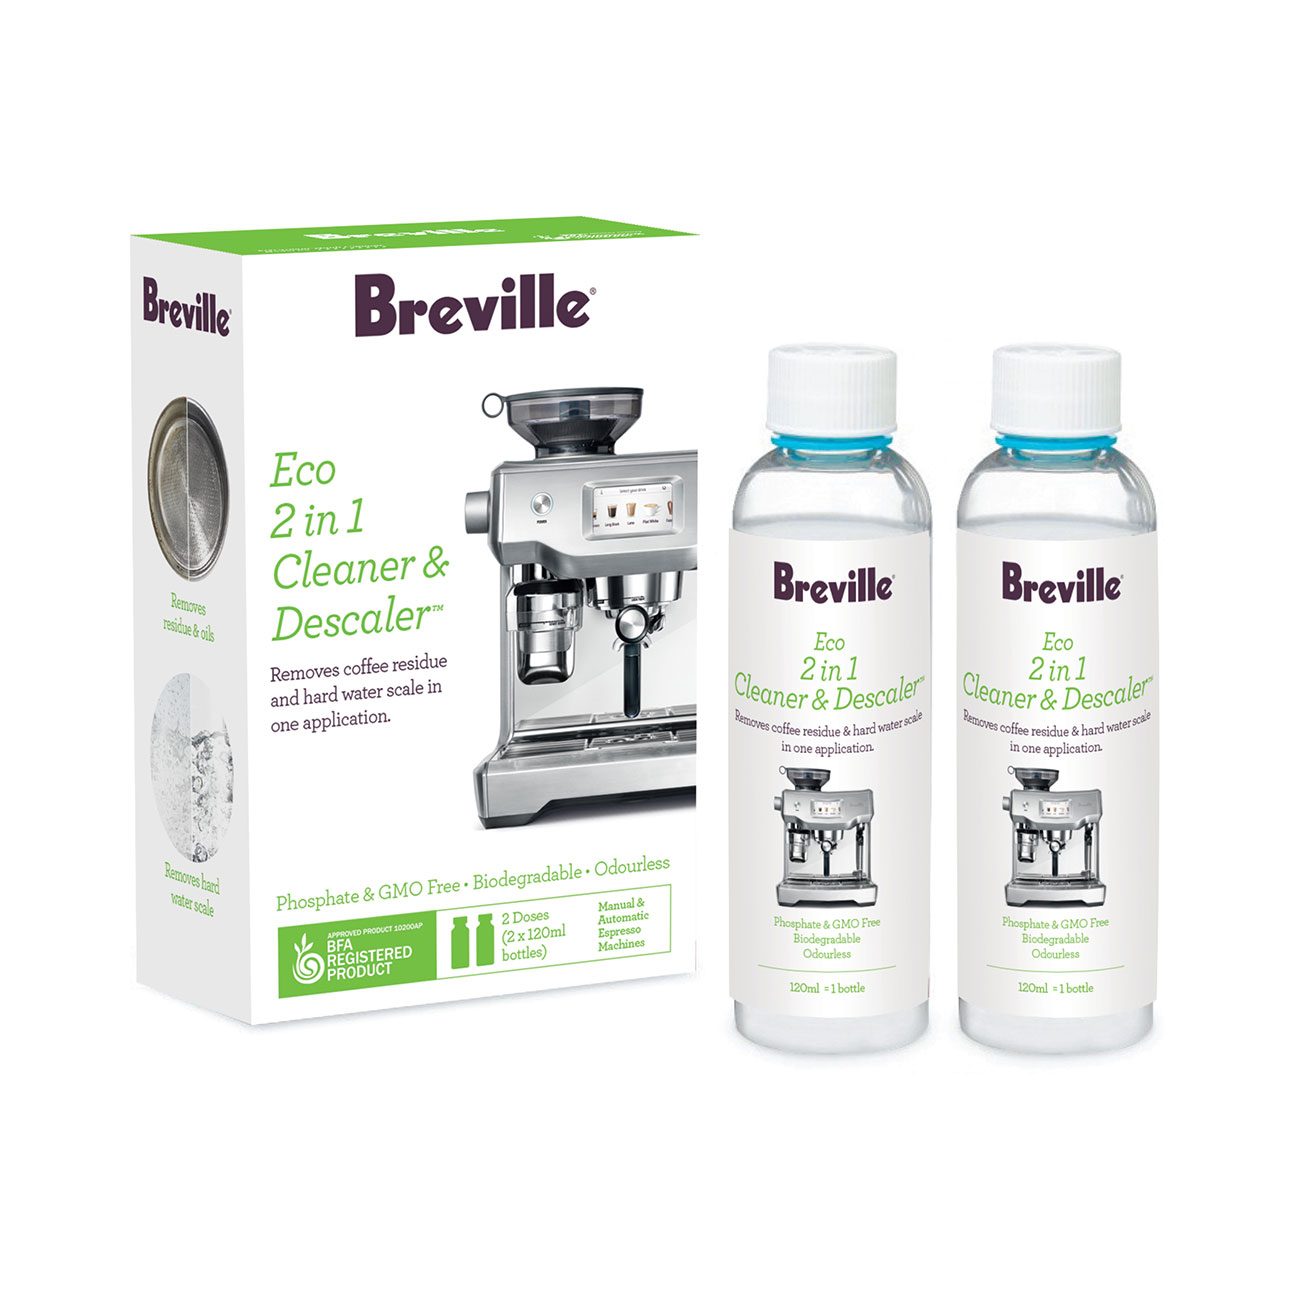 Wash Warrior Coffee Maker Cleaner And Descaler 18 Tablets Espresso Machine Cleaning Tablet for Breville and All Other Brands Non-Toxic Biodegradable Coffee Pot Cleaner And Descaler 